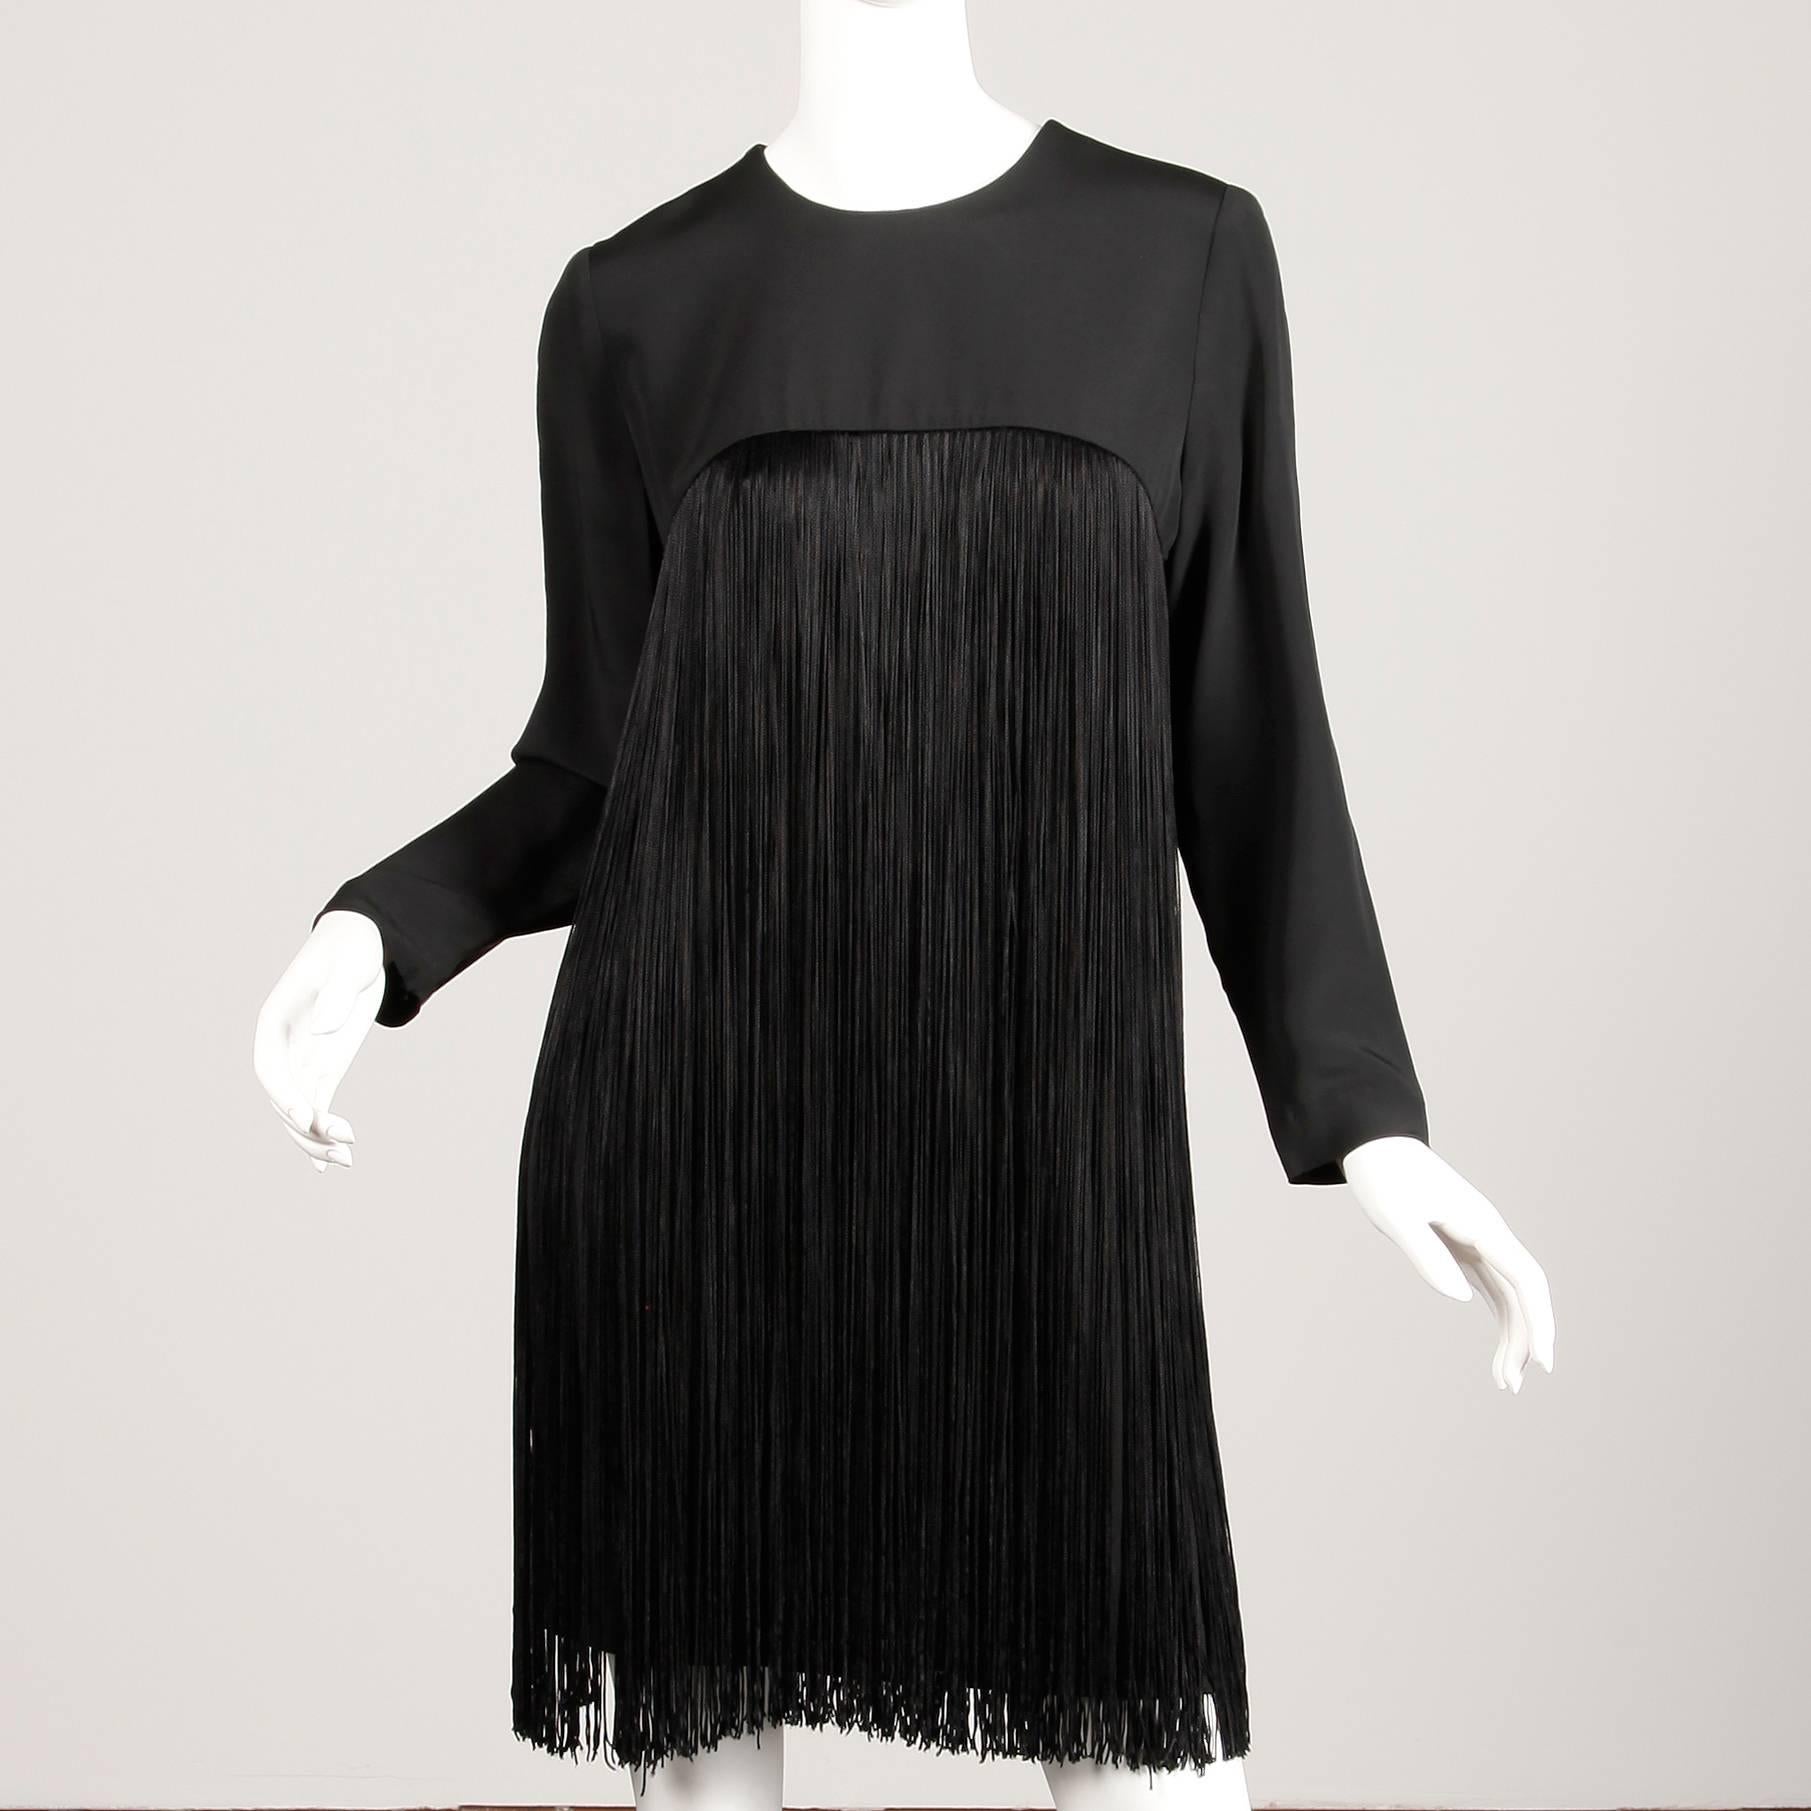 Gorgeous vintage black cocktail dress with long fringe by Travilla. Fully lined with rear zip closure and snap closure at wrists. The marked size is 10, but the dress fits like a modern size small-medium. The bust measures 36